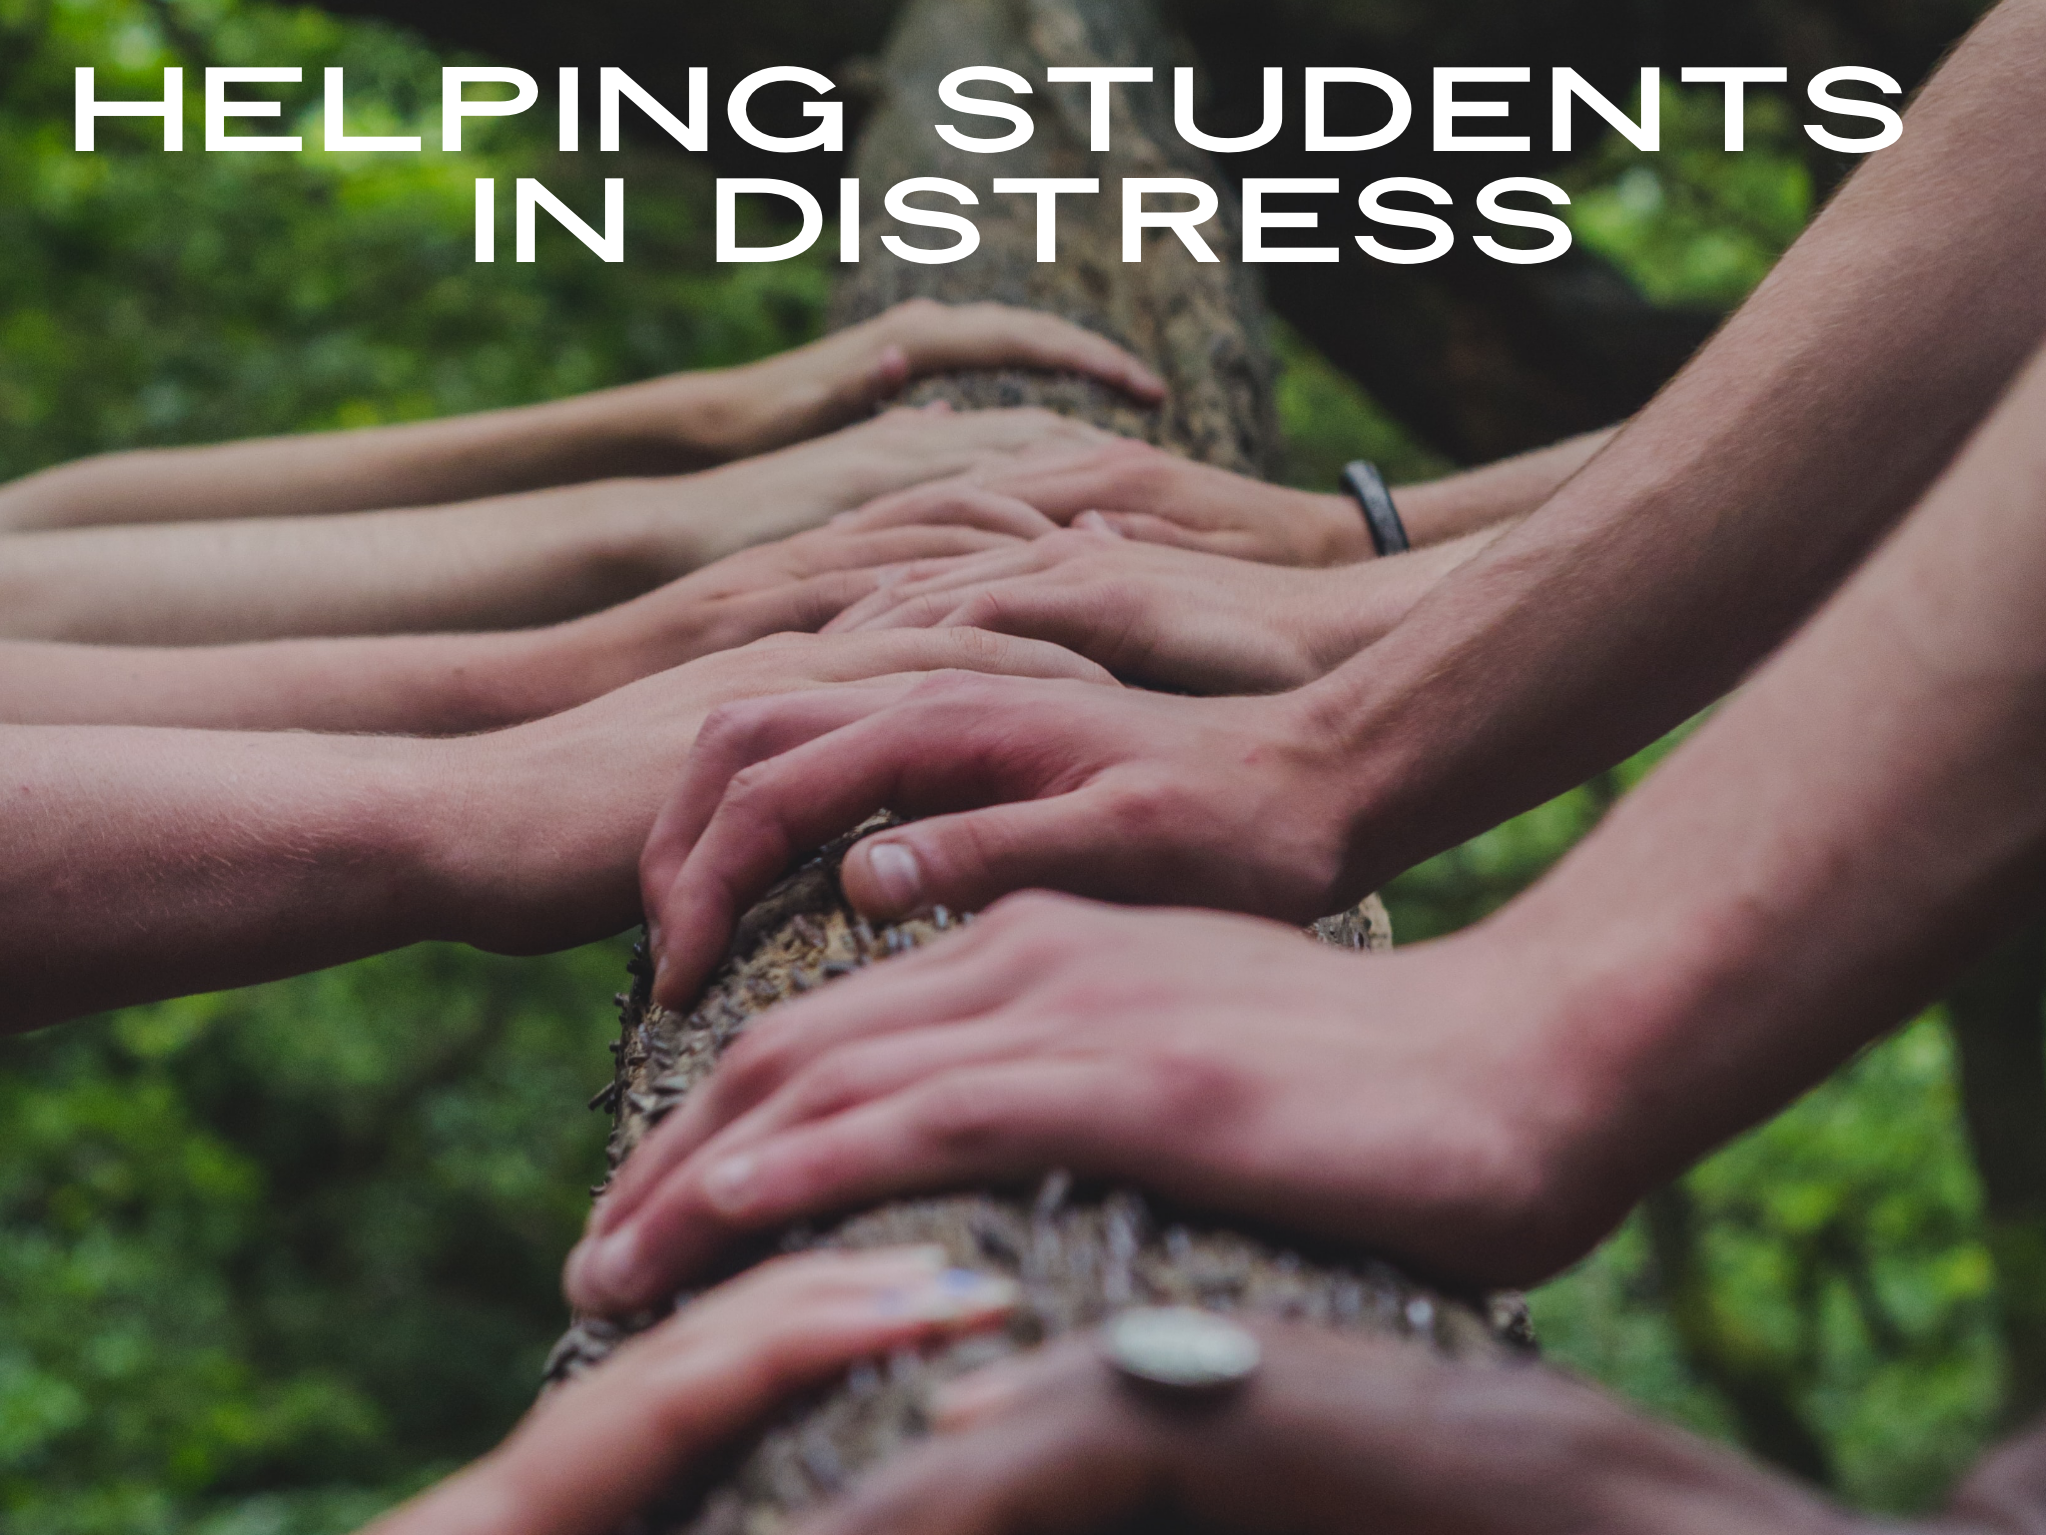 Helping Student in Distress